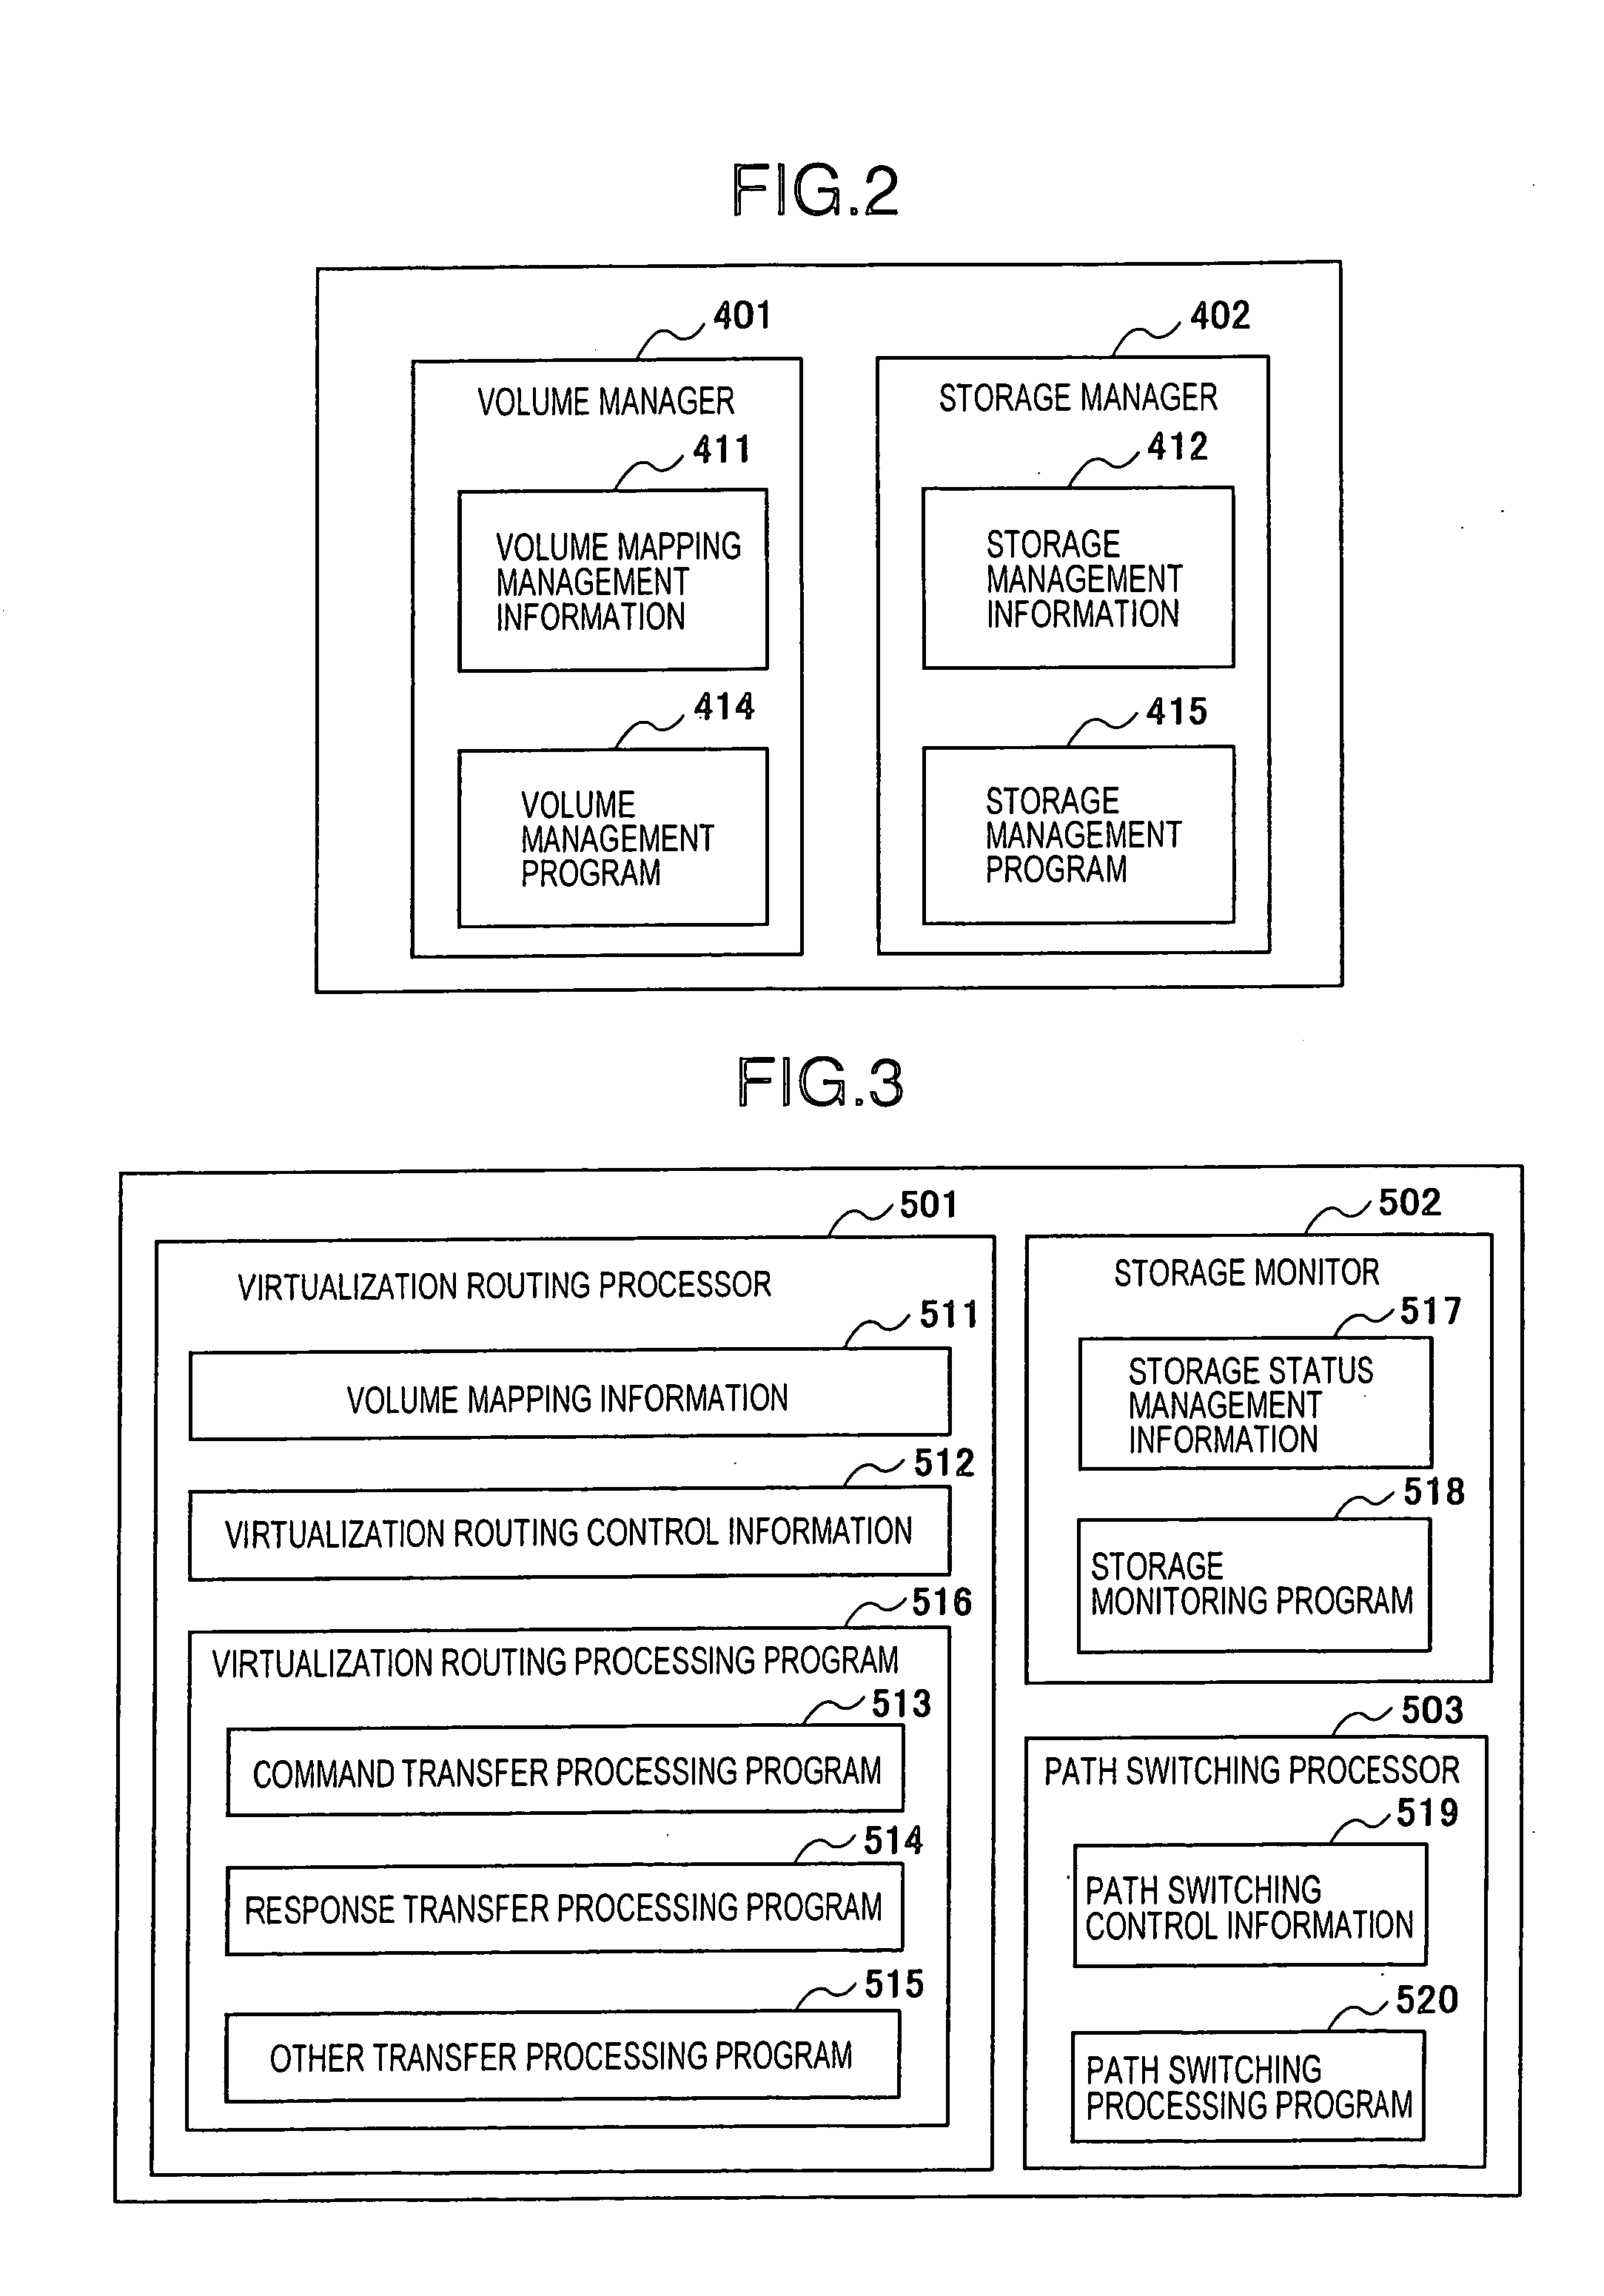 Virtualization controller, access path control method and computer system